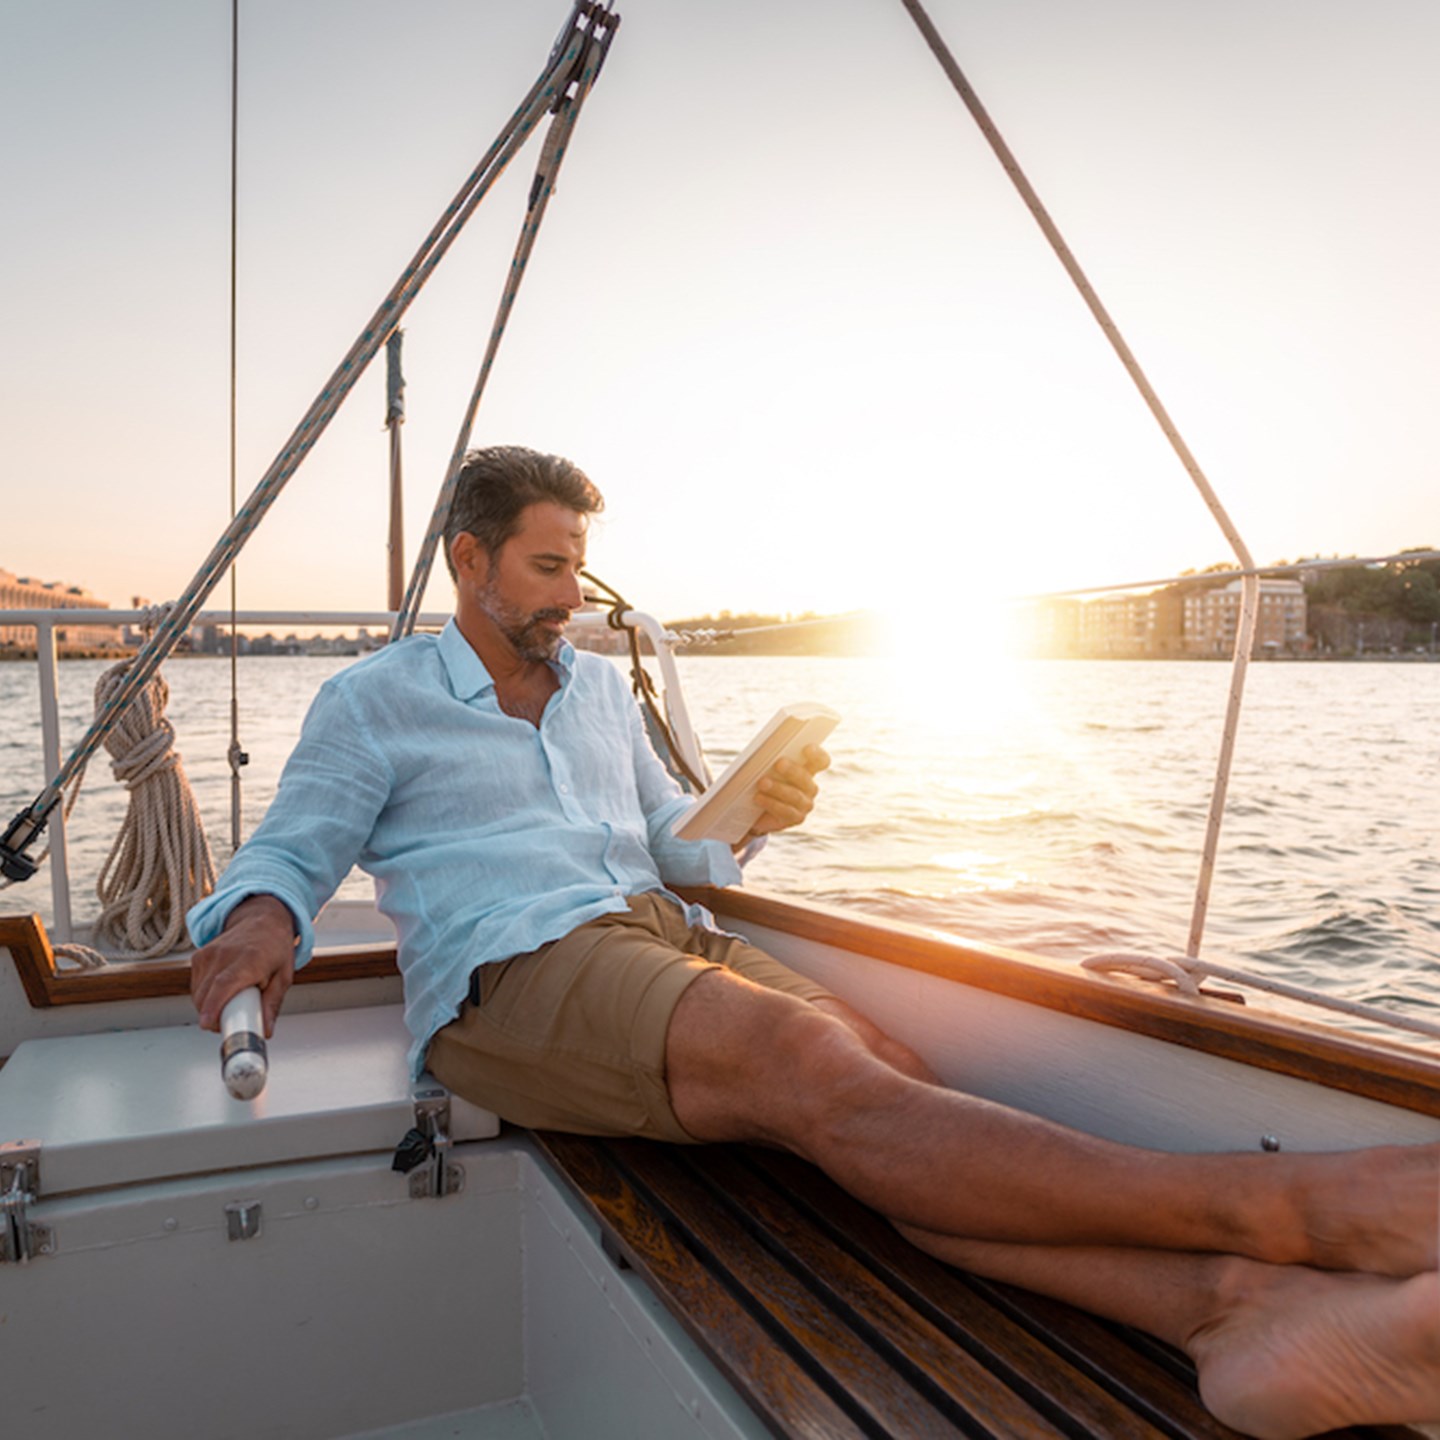 A man reading a book on a sail boat as the sun is setting